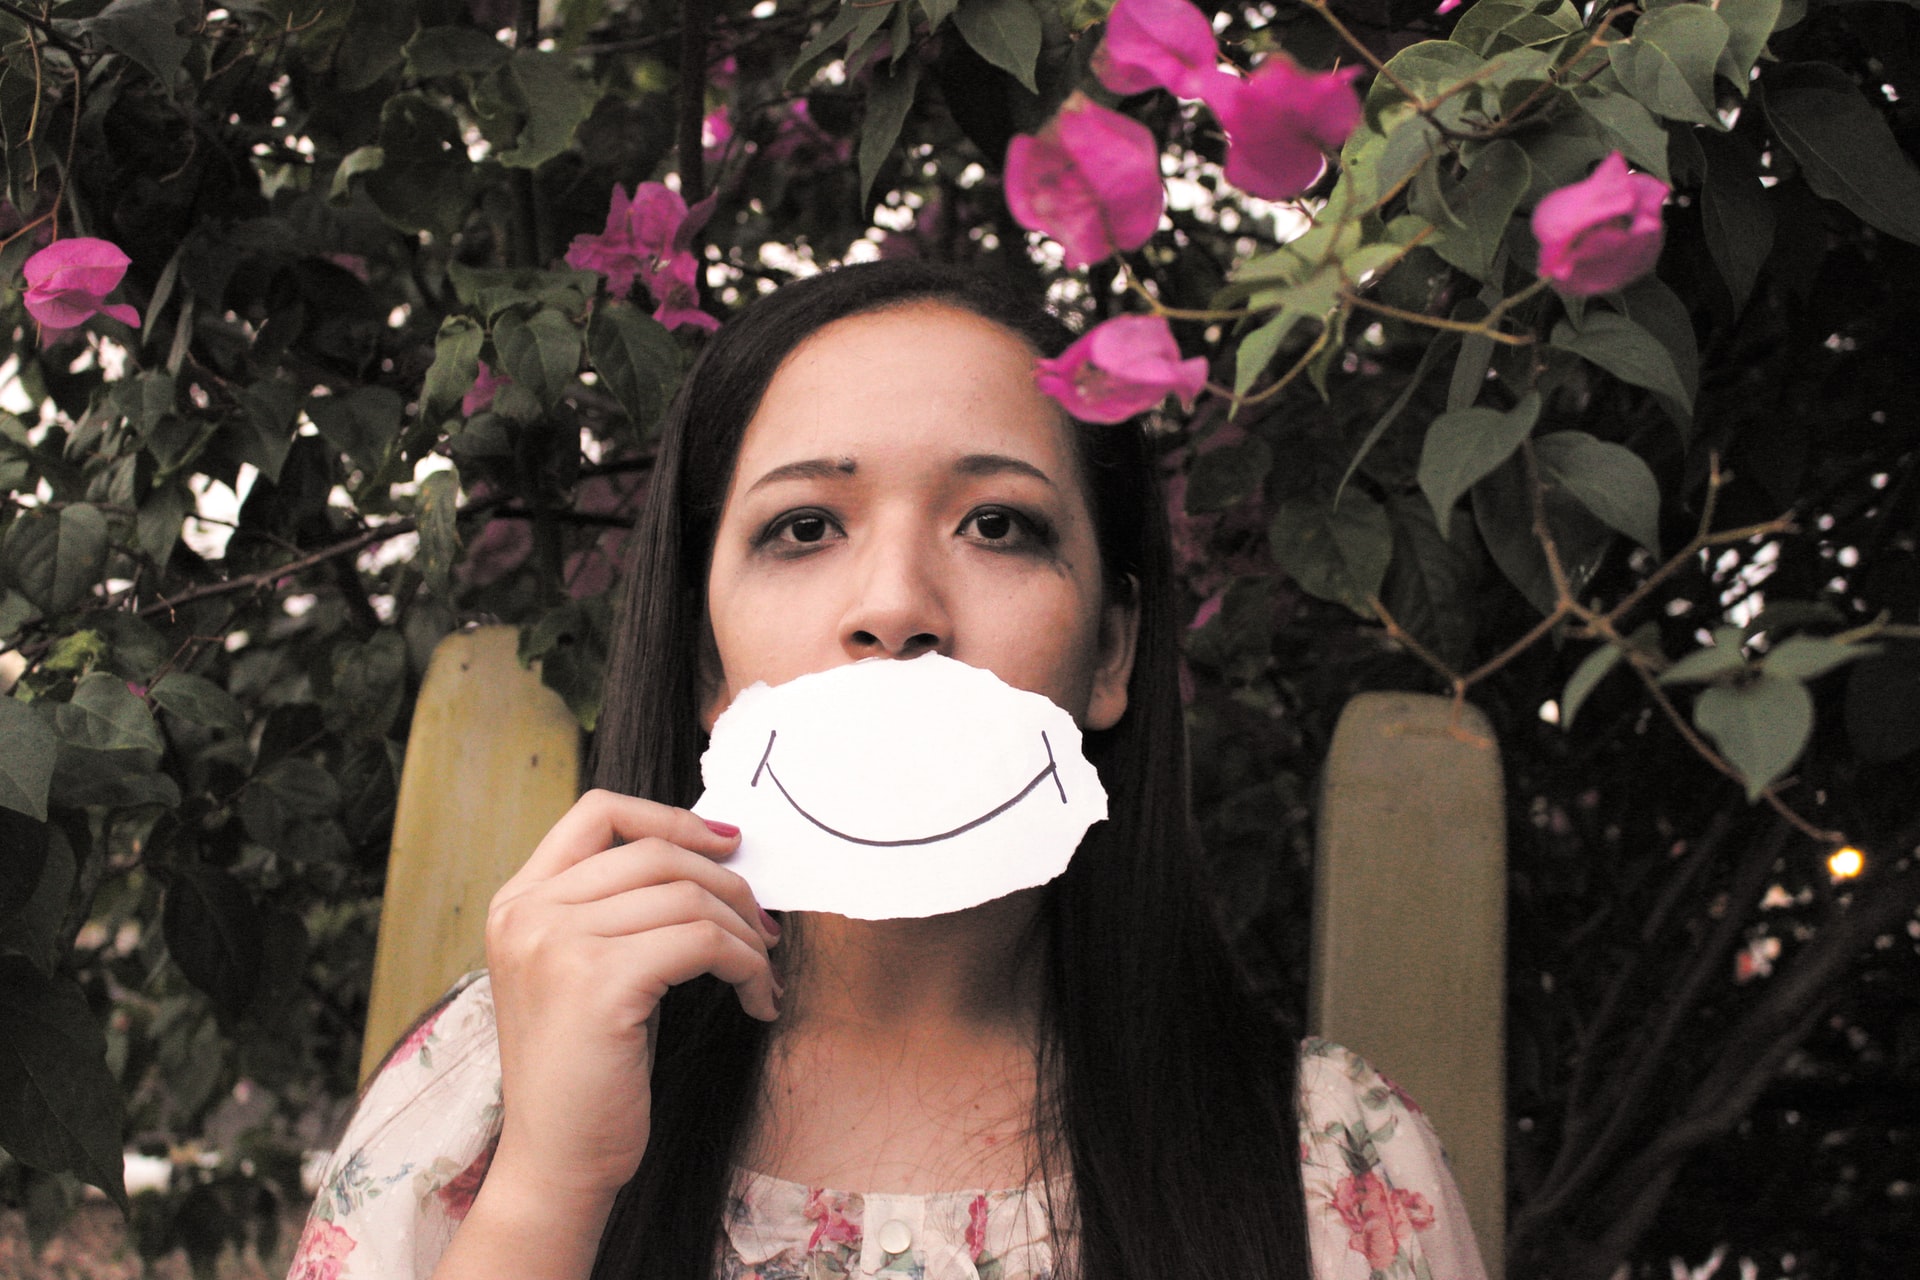 A girl holding a smiling face in front of her own face to mask her pain from self-harm